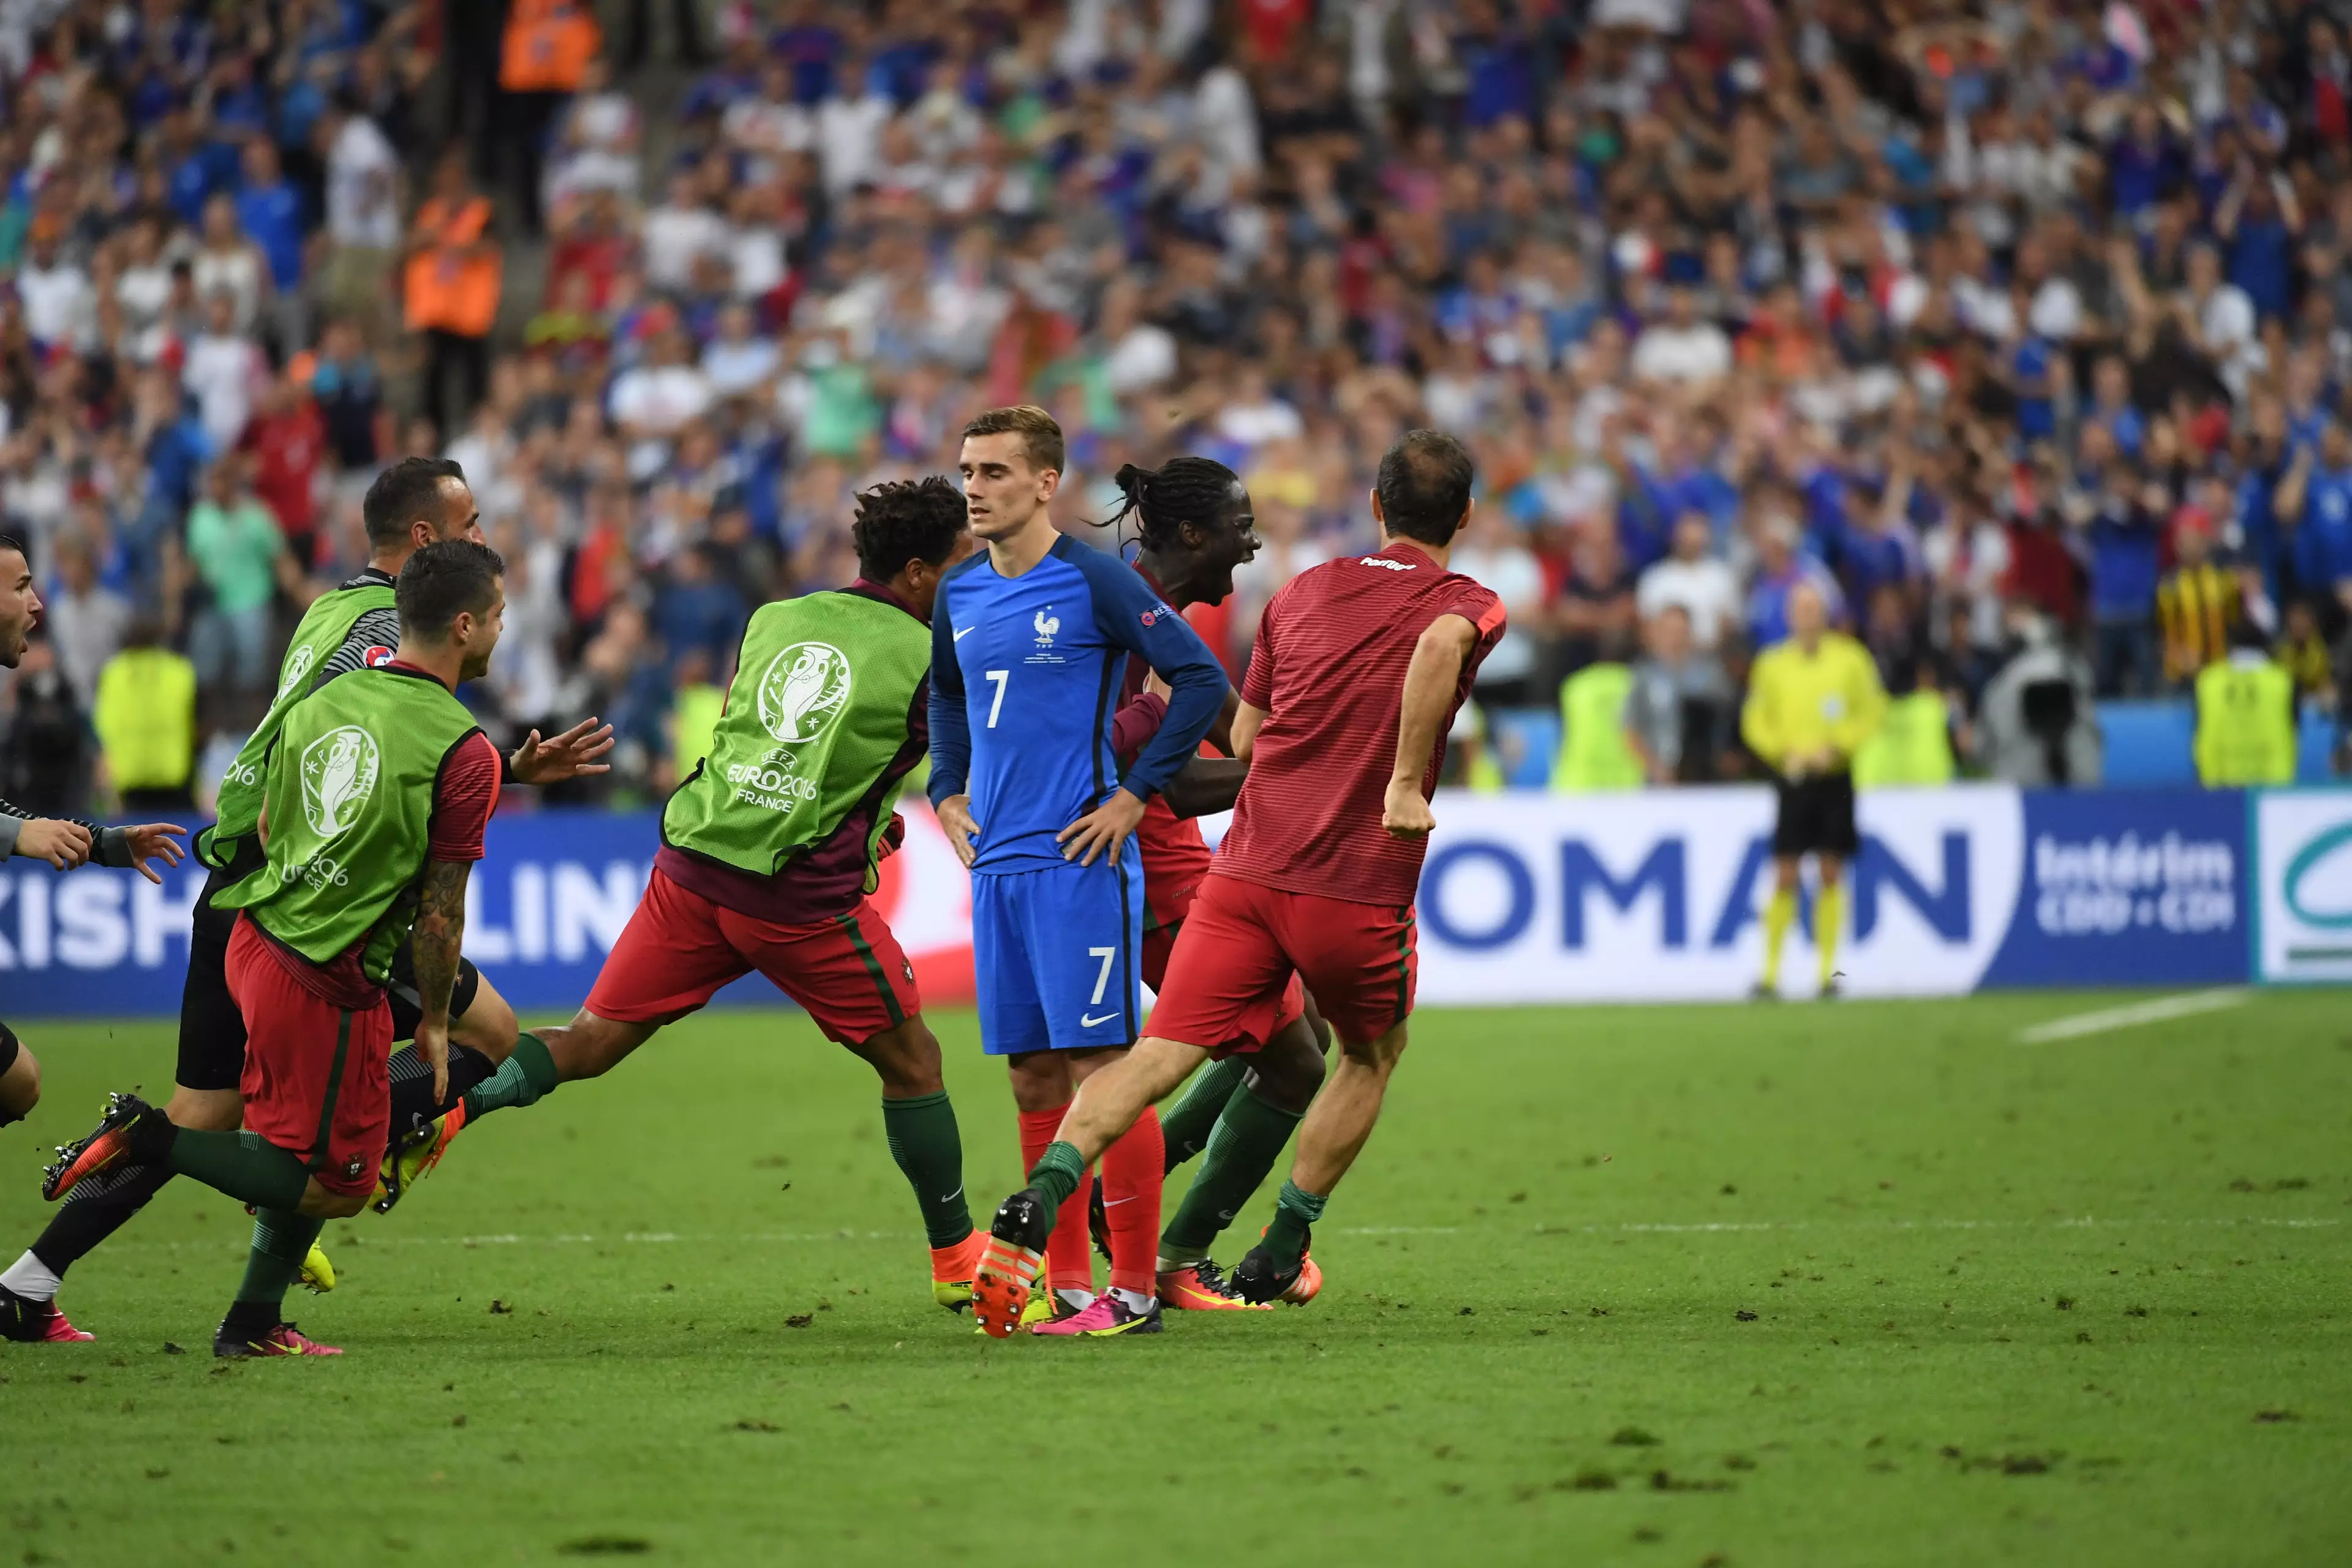 France and Portugal will meet on June 24th in a repeat of the Euro 2016 final. Image: PA Images